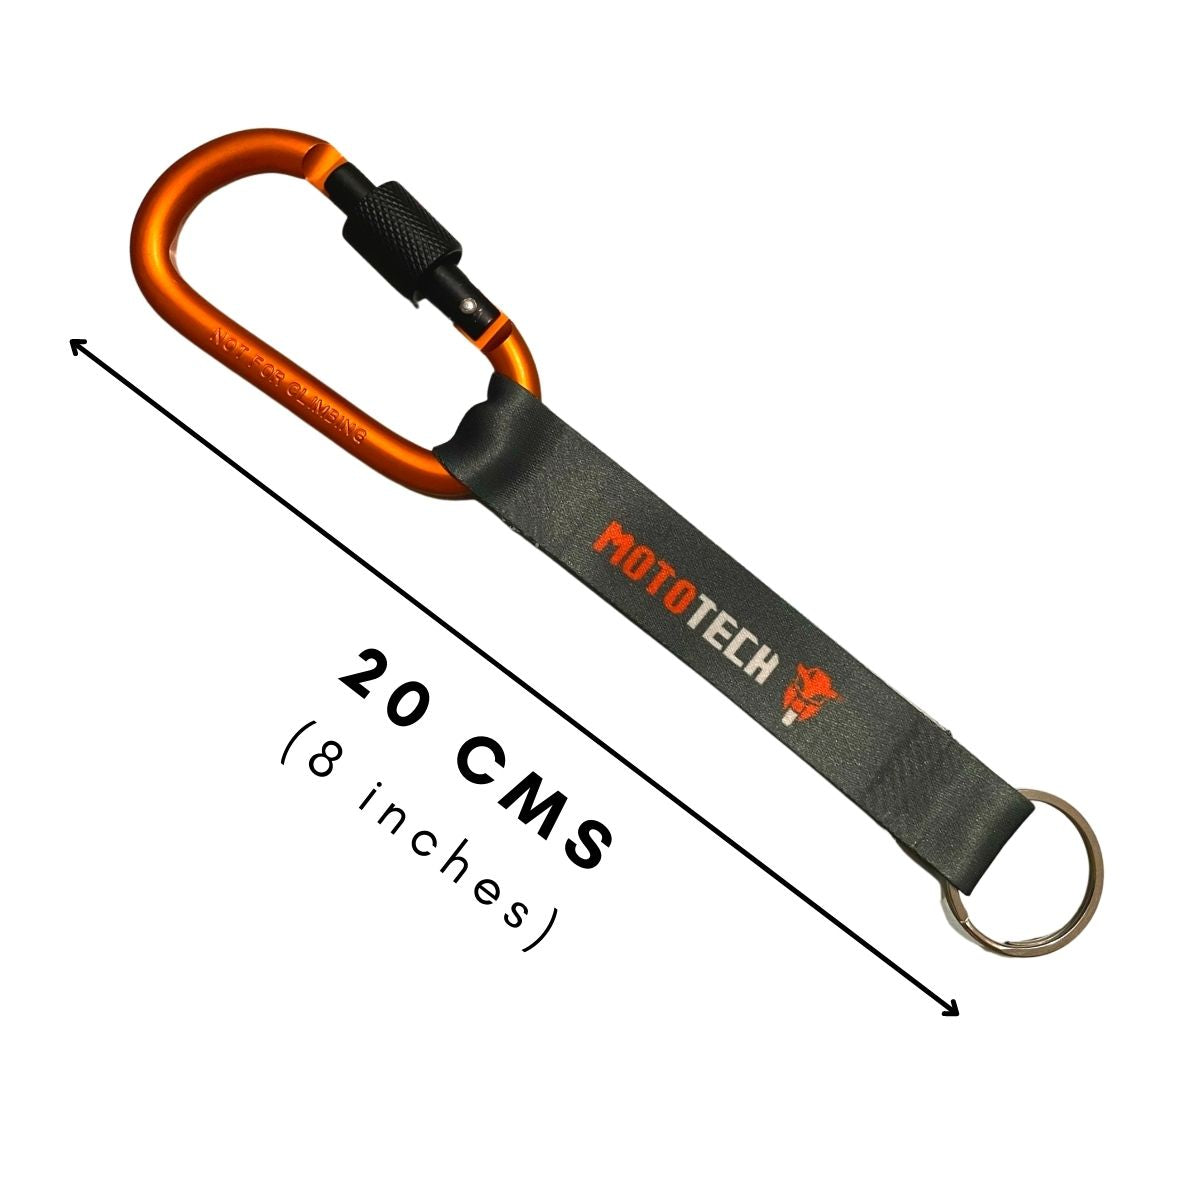 MotoTech Accessory Carabiner with Key Ring | OutdoorTravelGear.com